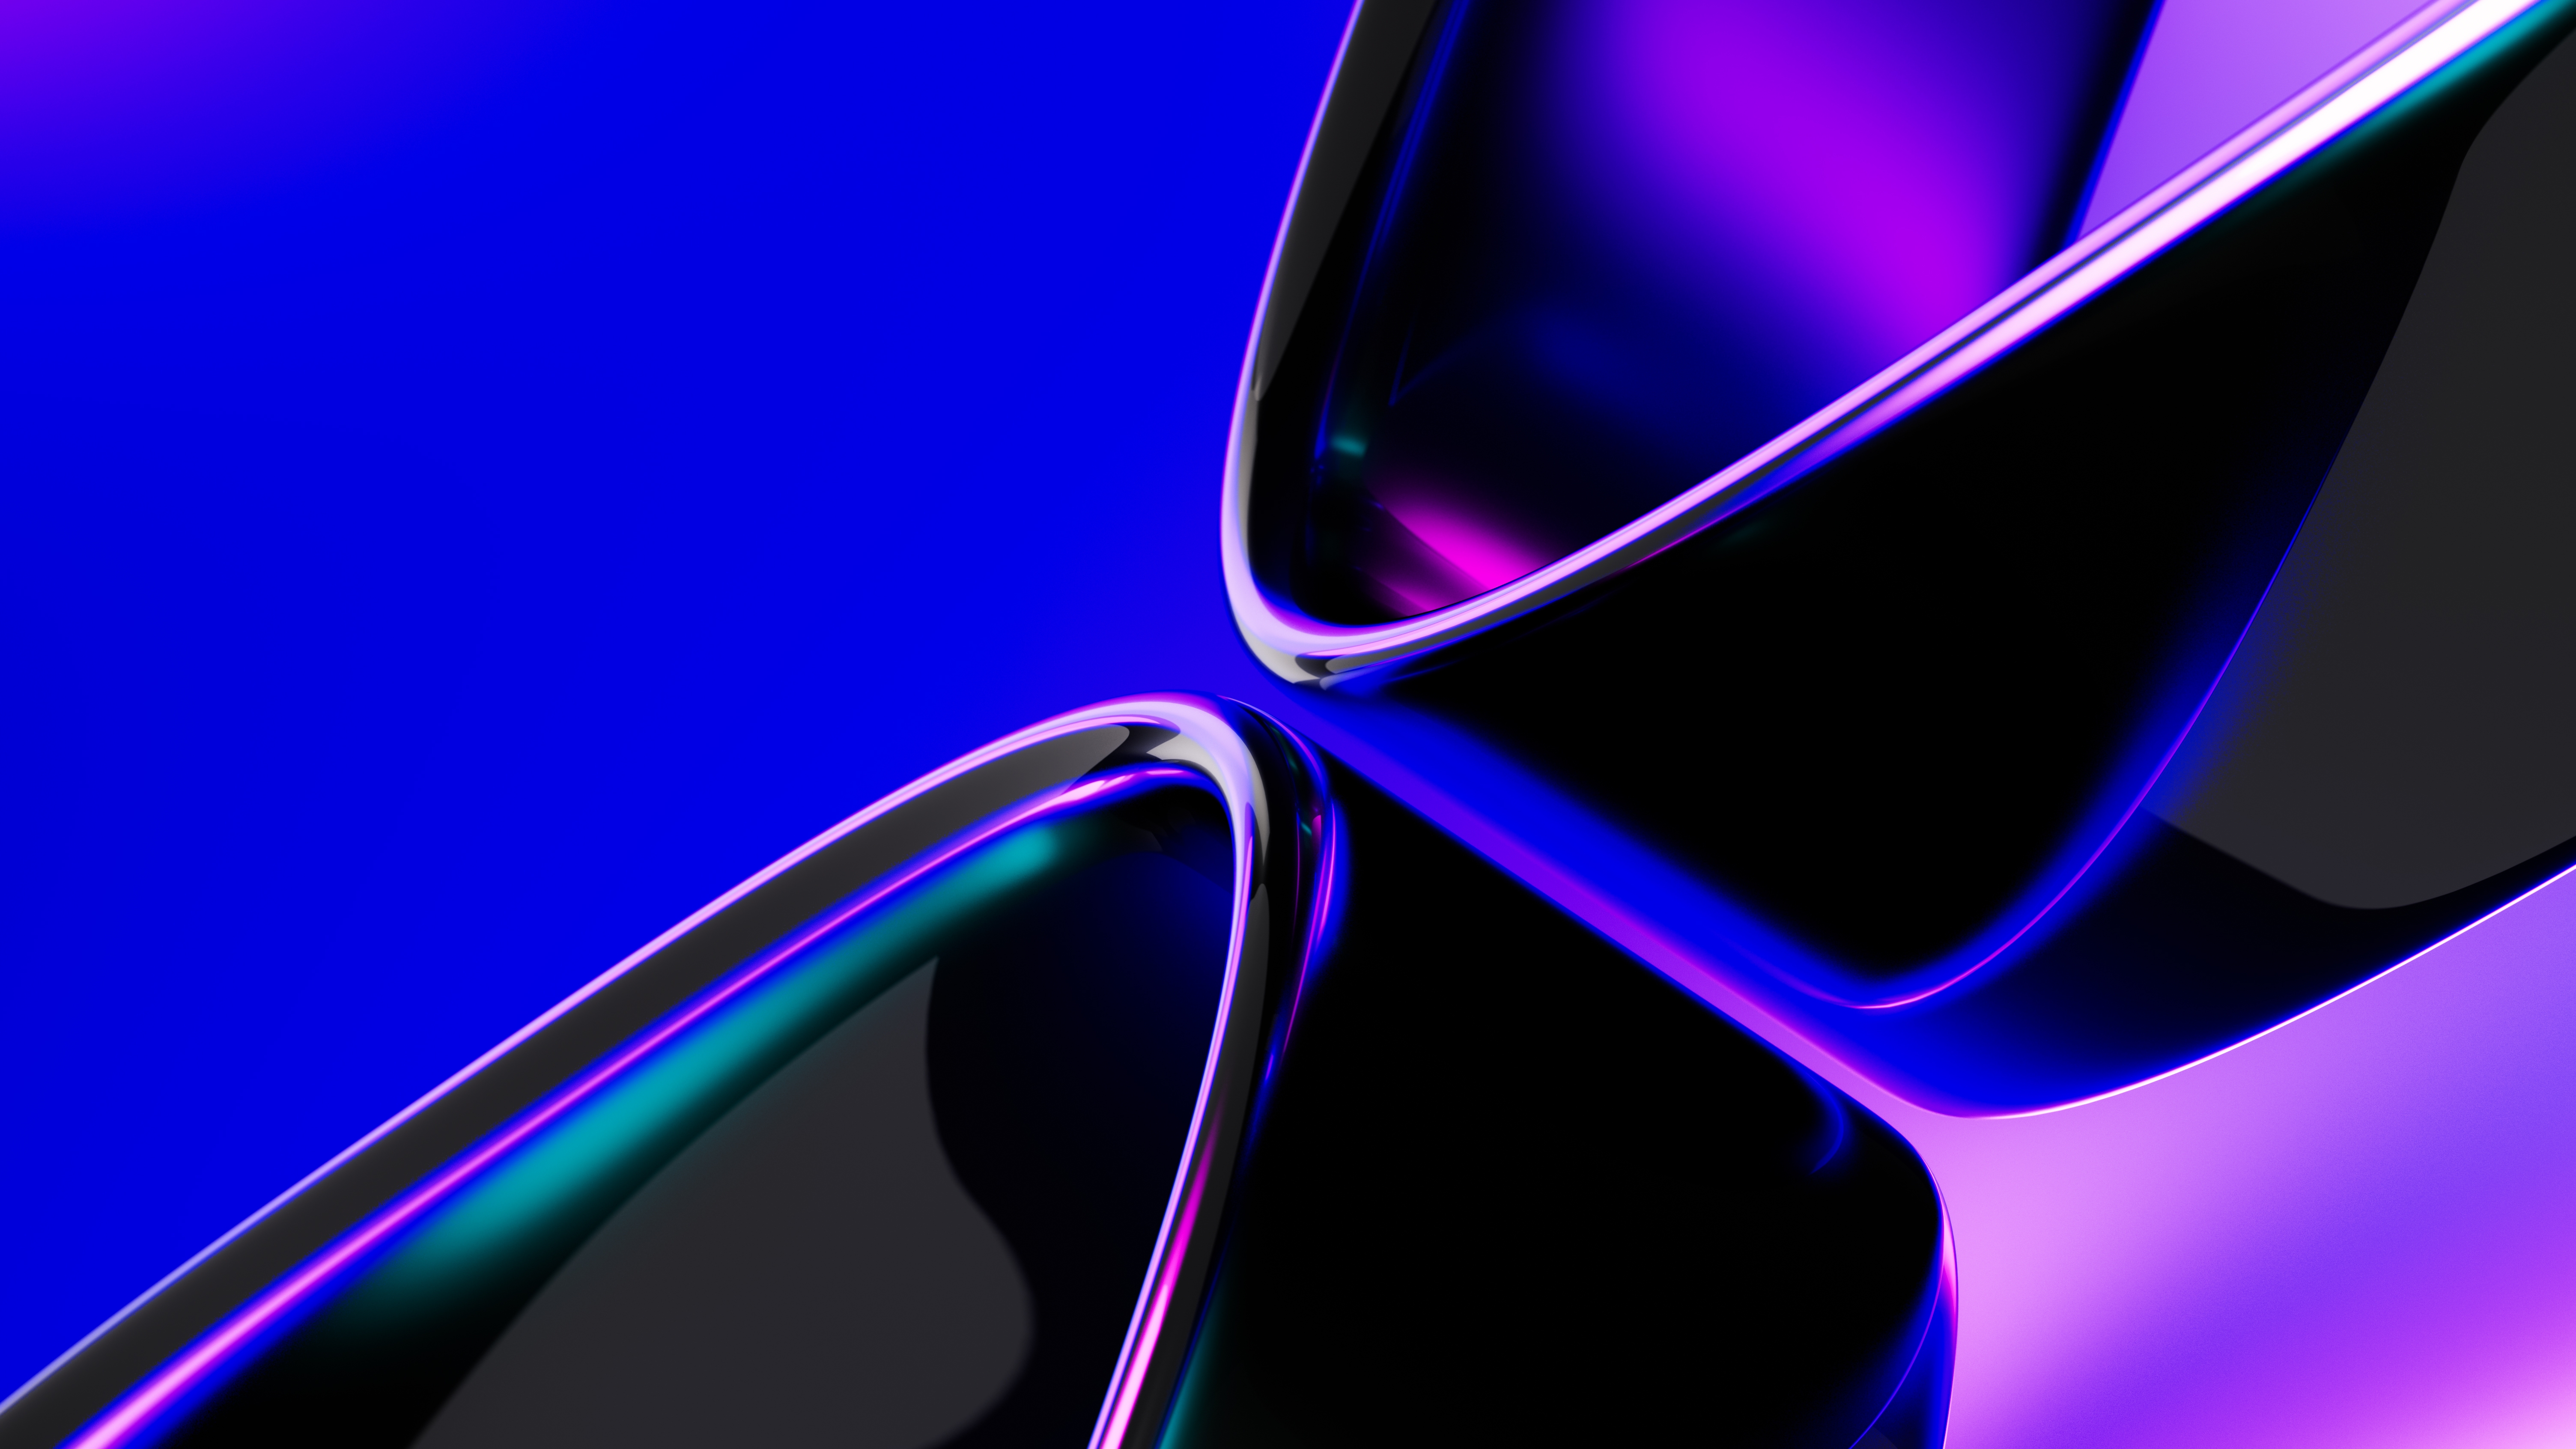 HD wallpaper, 3D Background, Blue Abstract, 5K